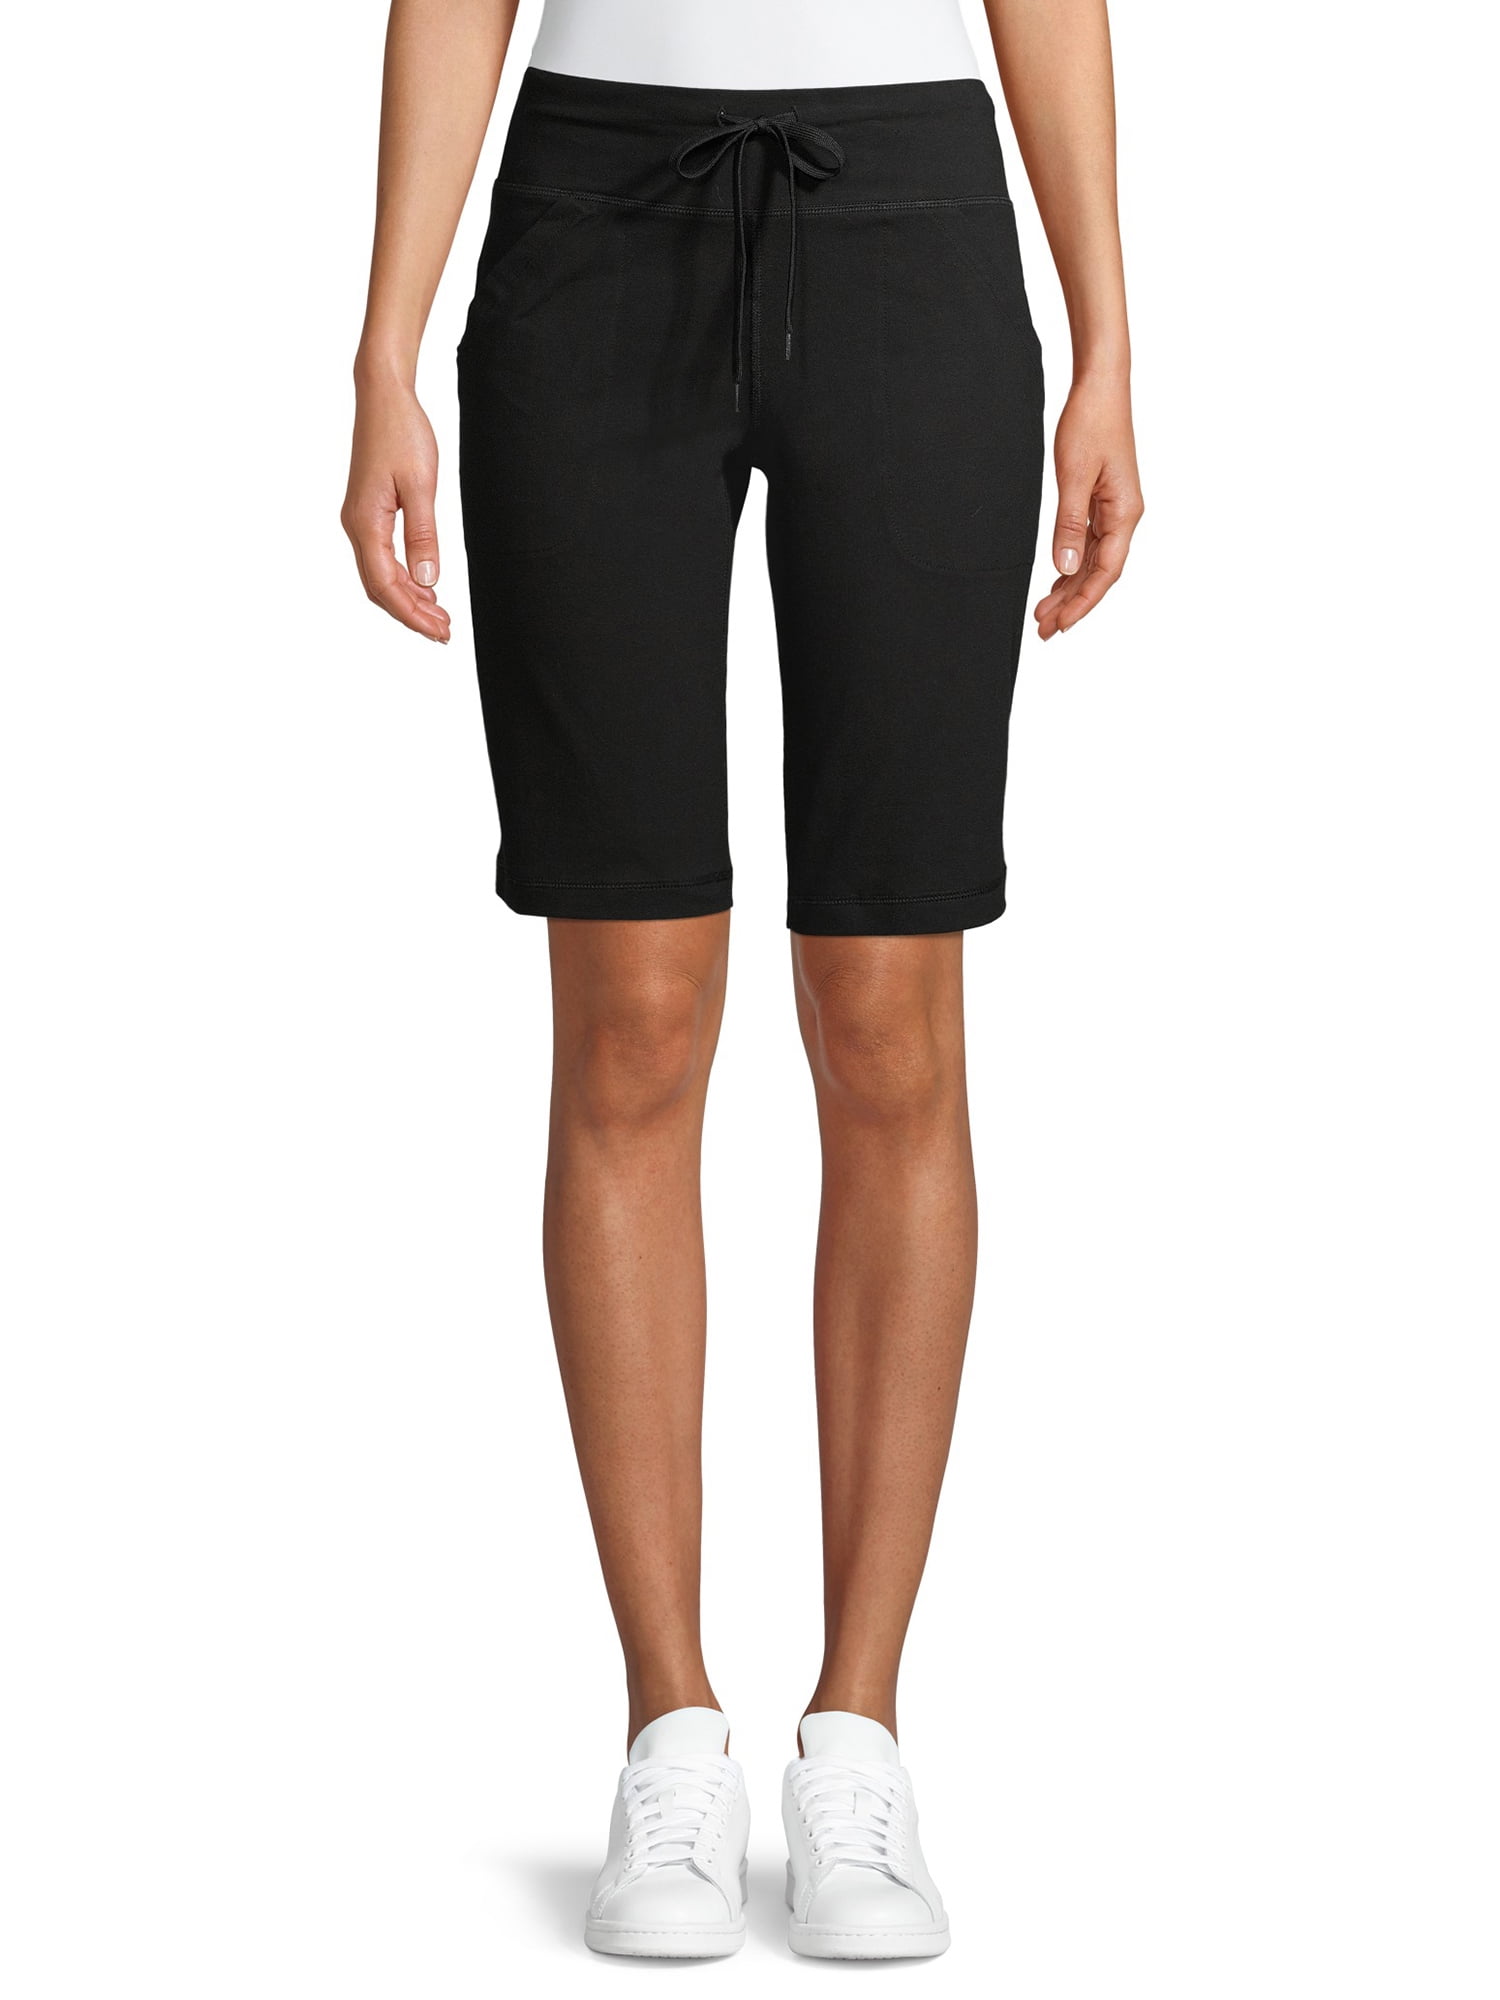 Athletic Works Women's Dri More Active 12